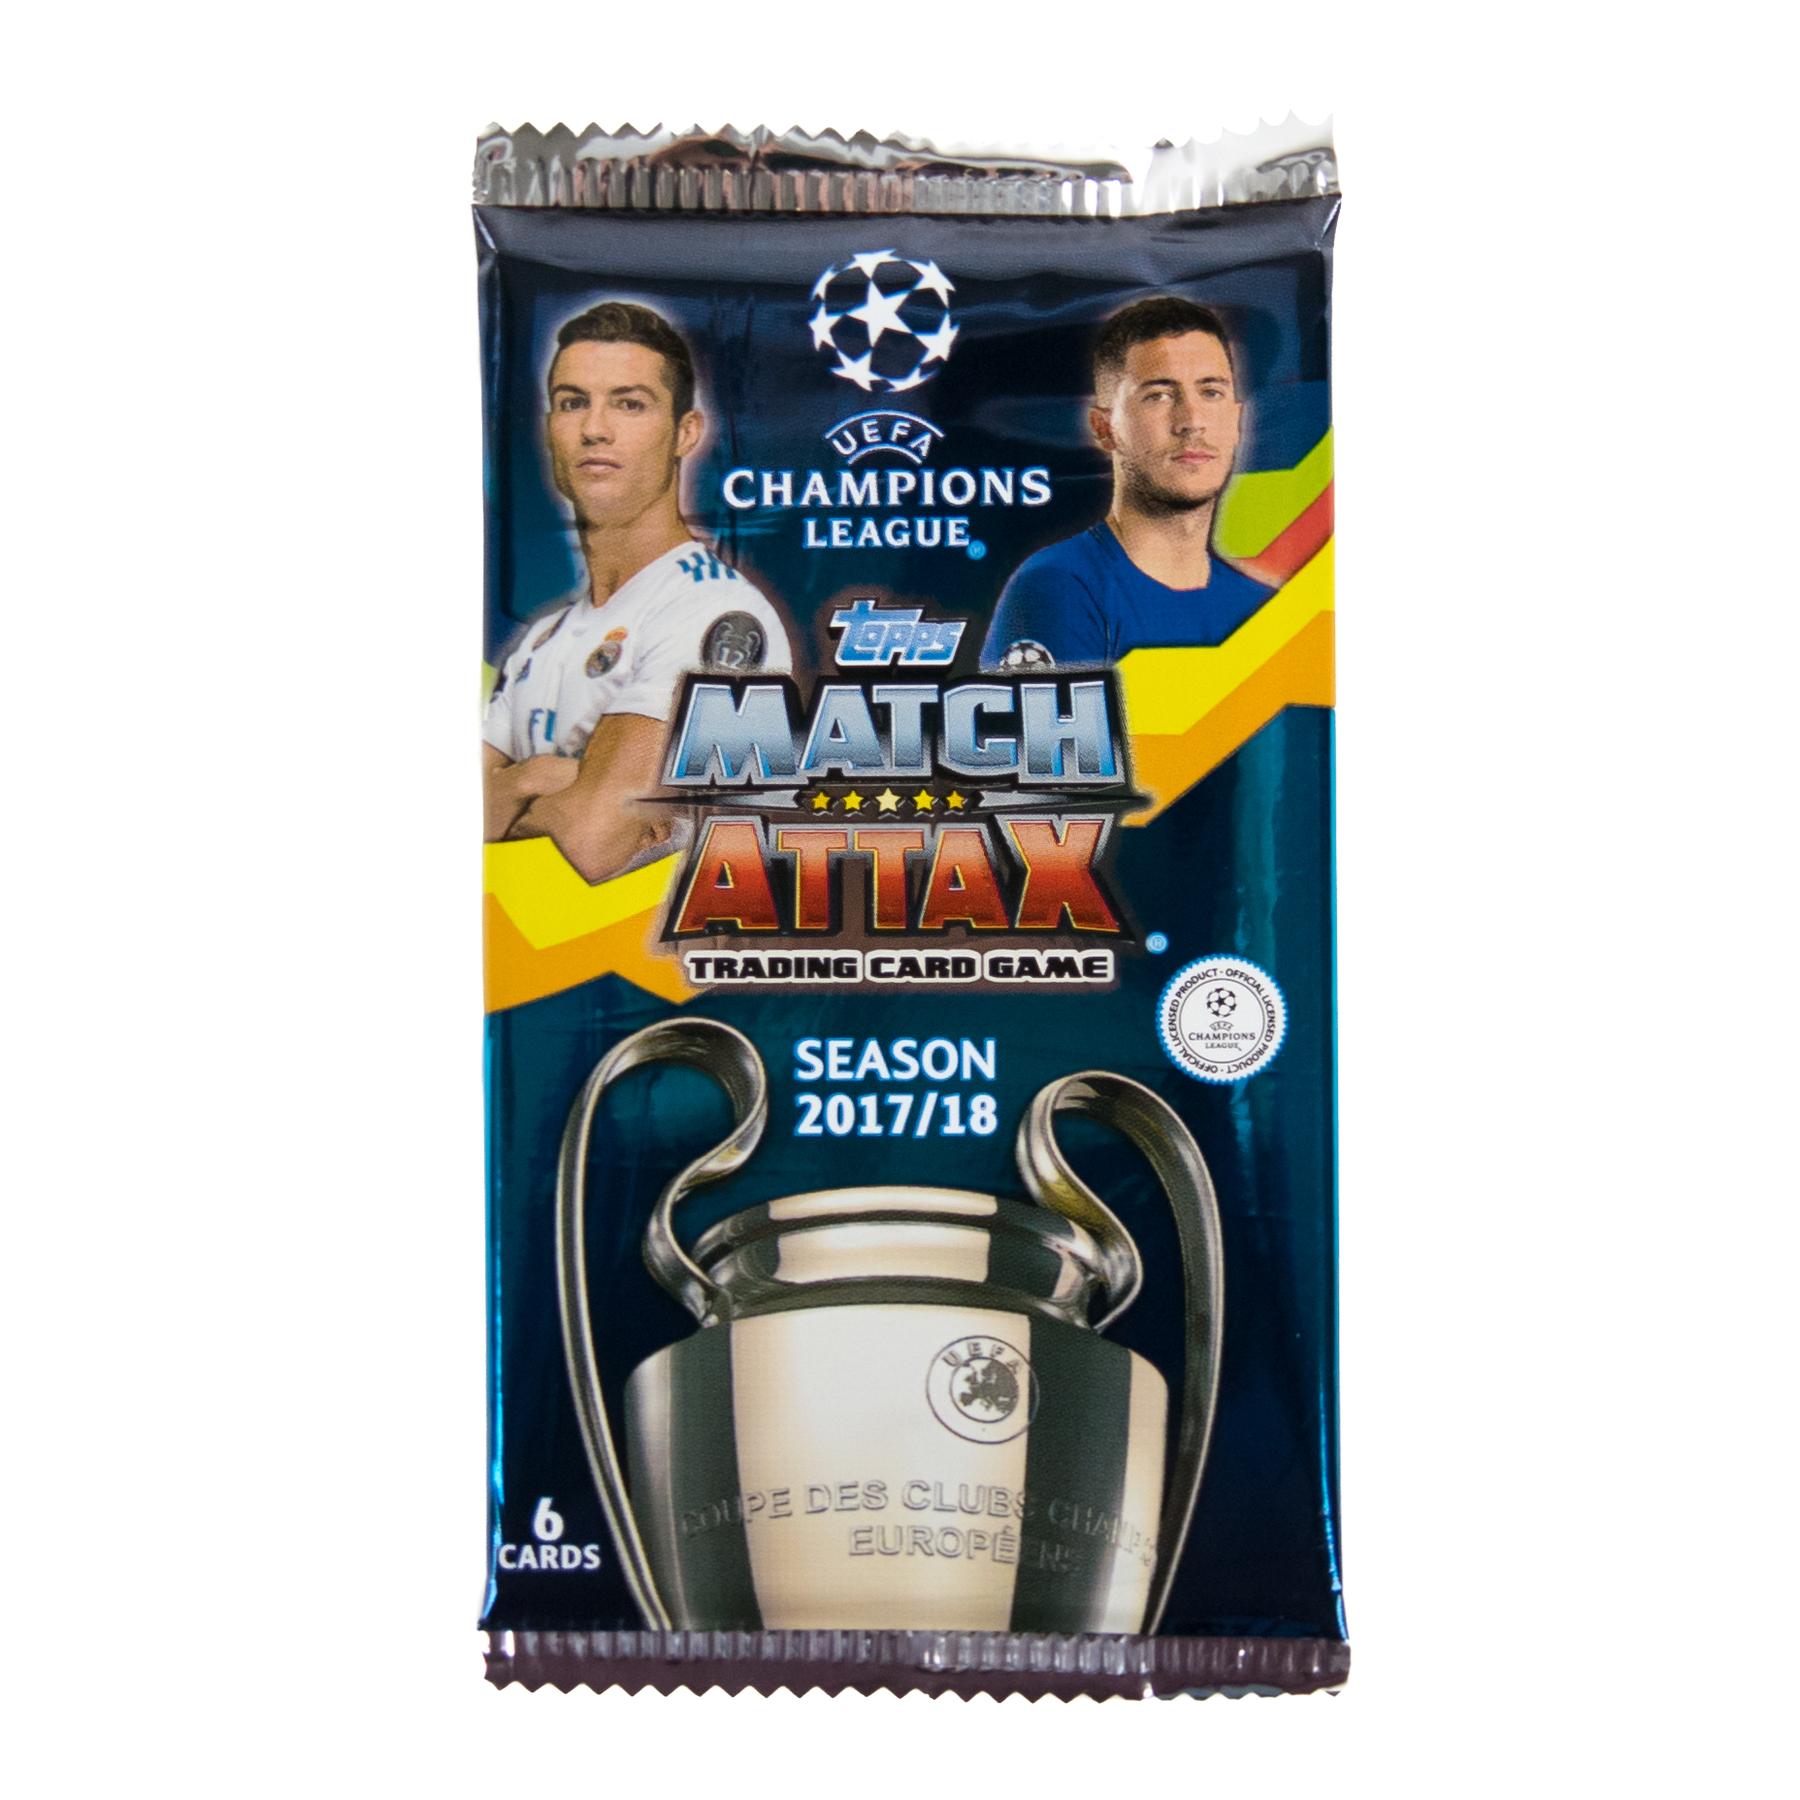 Match attax 2014//15 trading cards arsenal-base 2-18